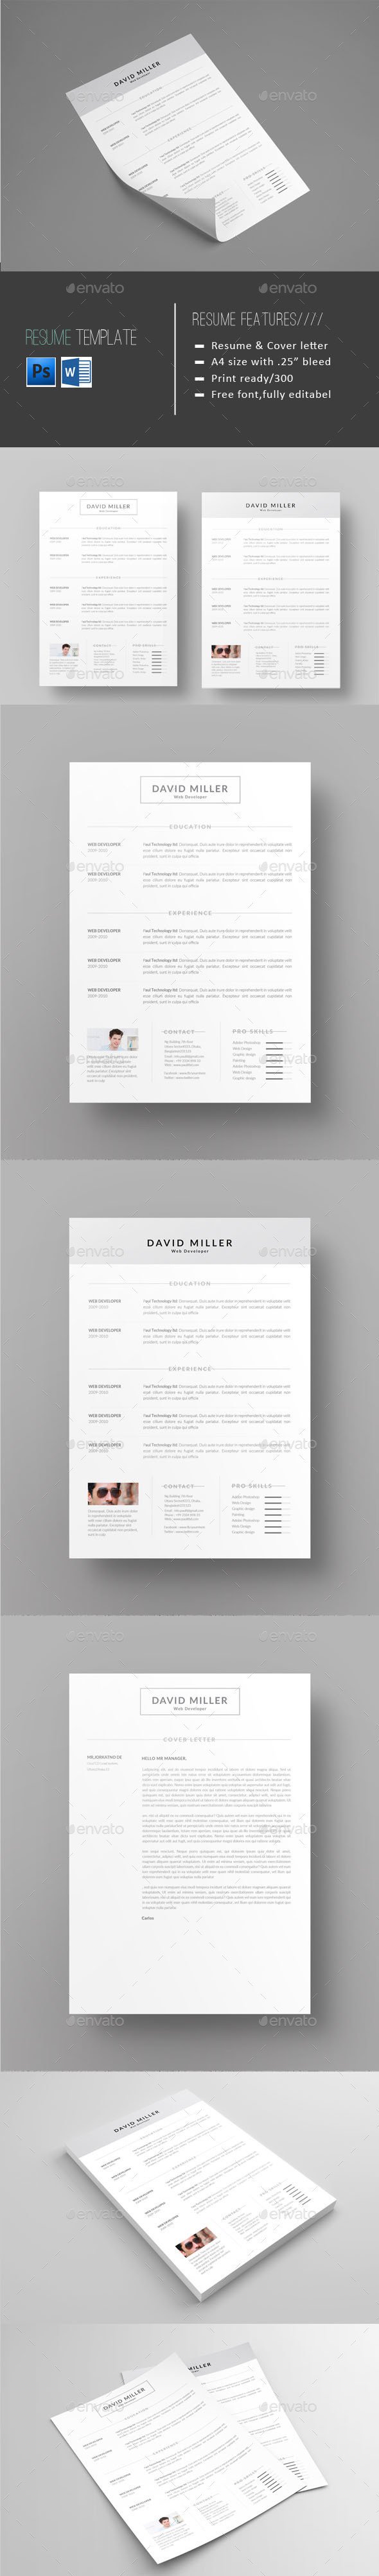 Textedit Resume Template Pin by Ux Design Mastery On Ux Design Resume